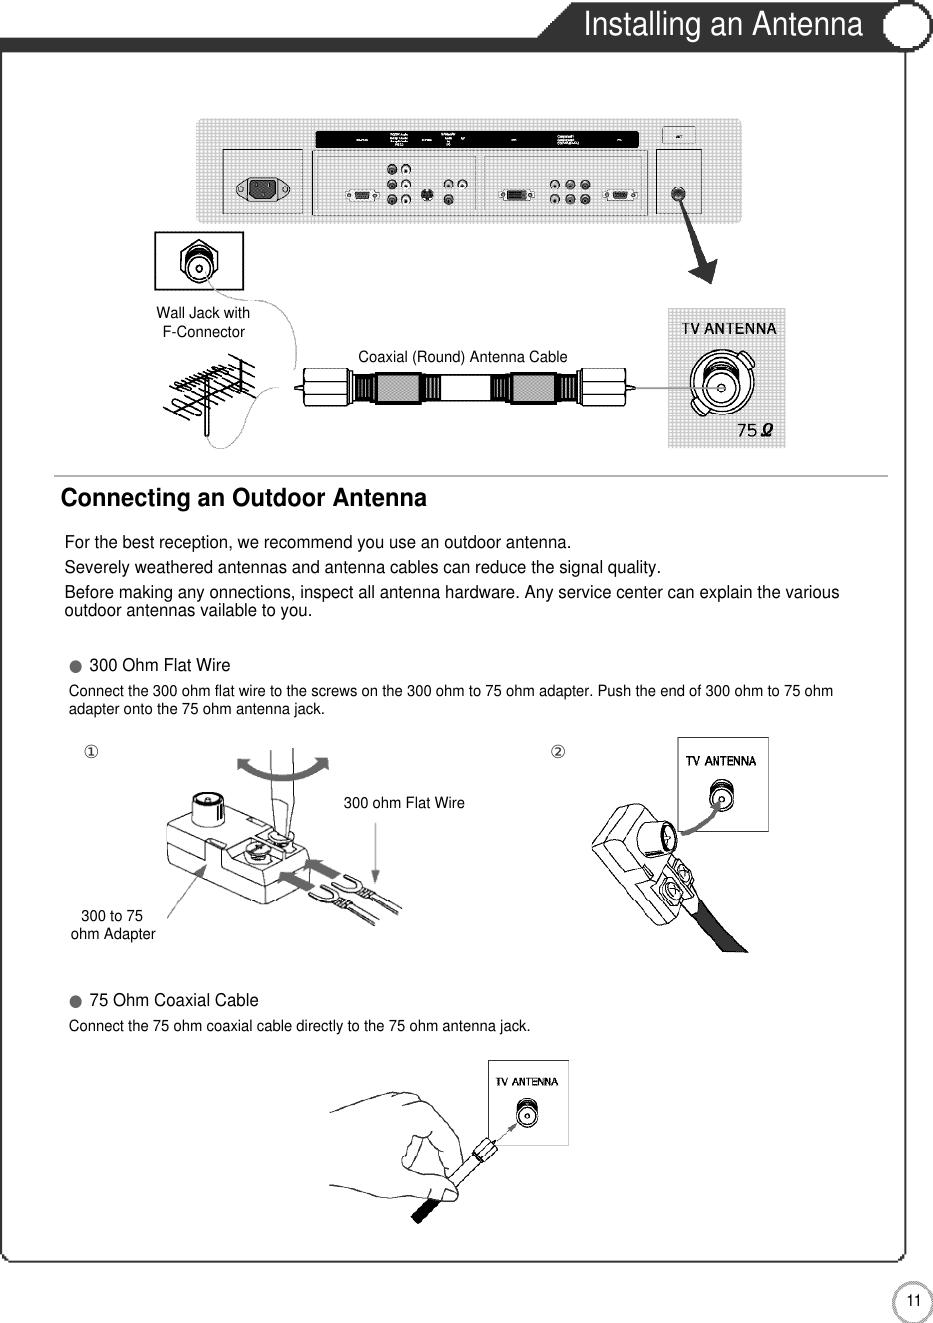 1 1User Guidance InformationInstalling an AntennaFor the best reception, we recommend you use an outdoor antenna.Severely weathered antennas and antenna cables can reduce the signal quality.Before making any onnections, inspect all antenna hardware. Any service center can explain the variousoutdoor antennas vailable to you.Wall Jack withF-Connector300 to 75ohm Adapter  Coaxial (Round) Antenna CableConnecting an Outdoor Antenna●300 Ohm Flat WireConnect the 300 ohm flat wire to the screws on the 300 ohm to 75 ohm adapter. Push the end of 300 ohm to 75 ohm adapter onto the 75 ohm antenna jack.●75 Ohm Coaxial CableConnect the 75 ohm coaxial cable directly to the 75 ohm antenna jack.300 ohm Flat Wire②①